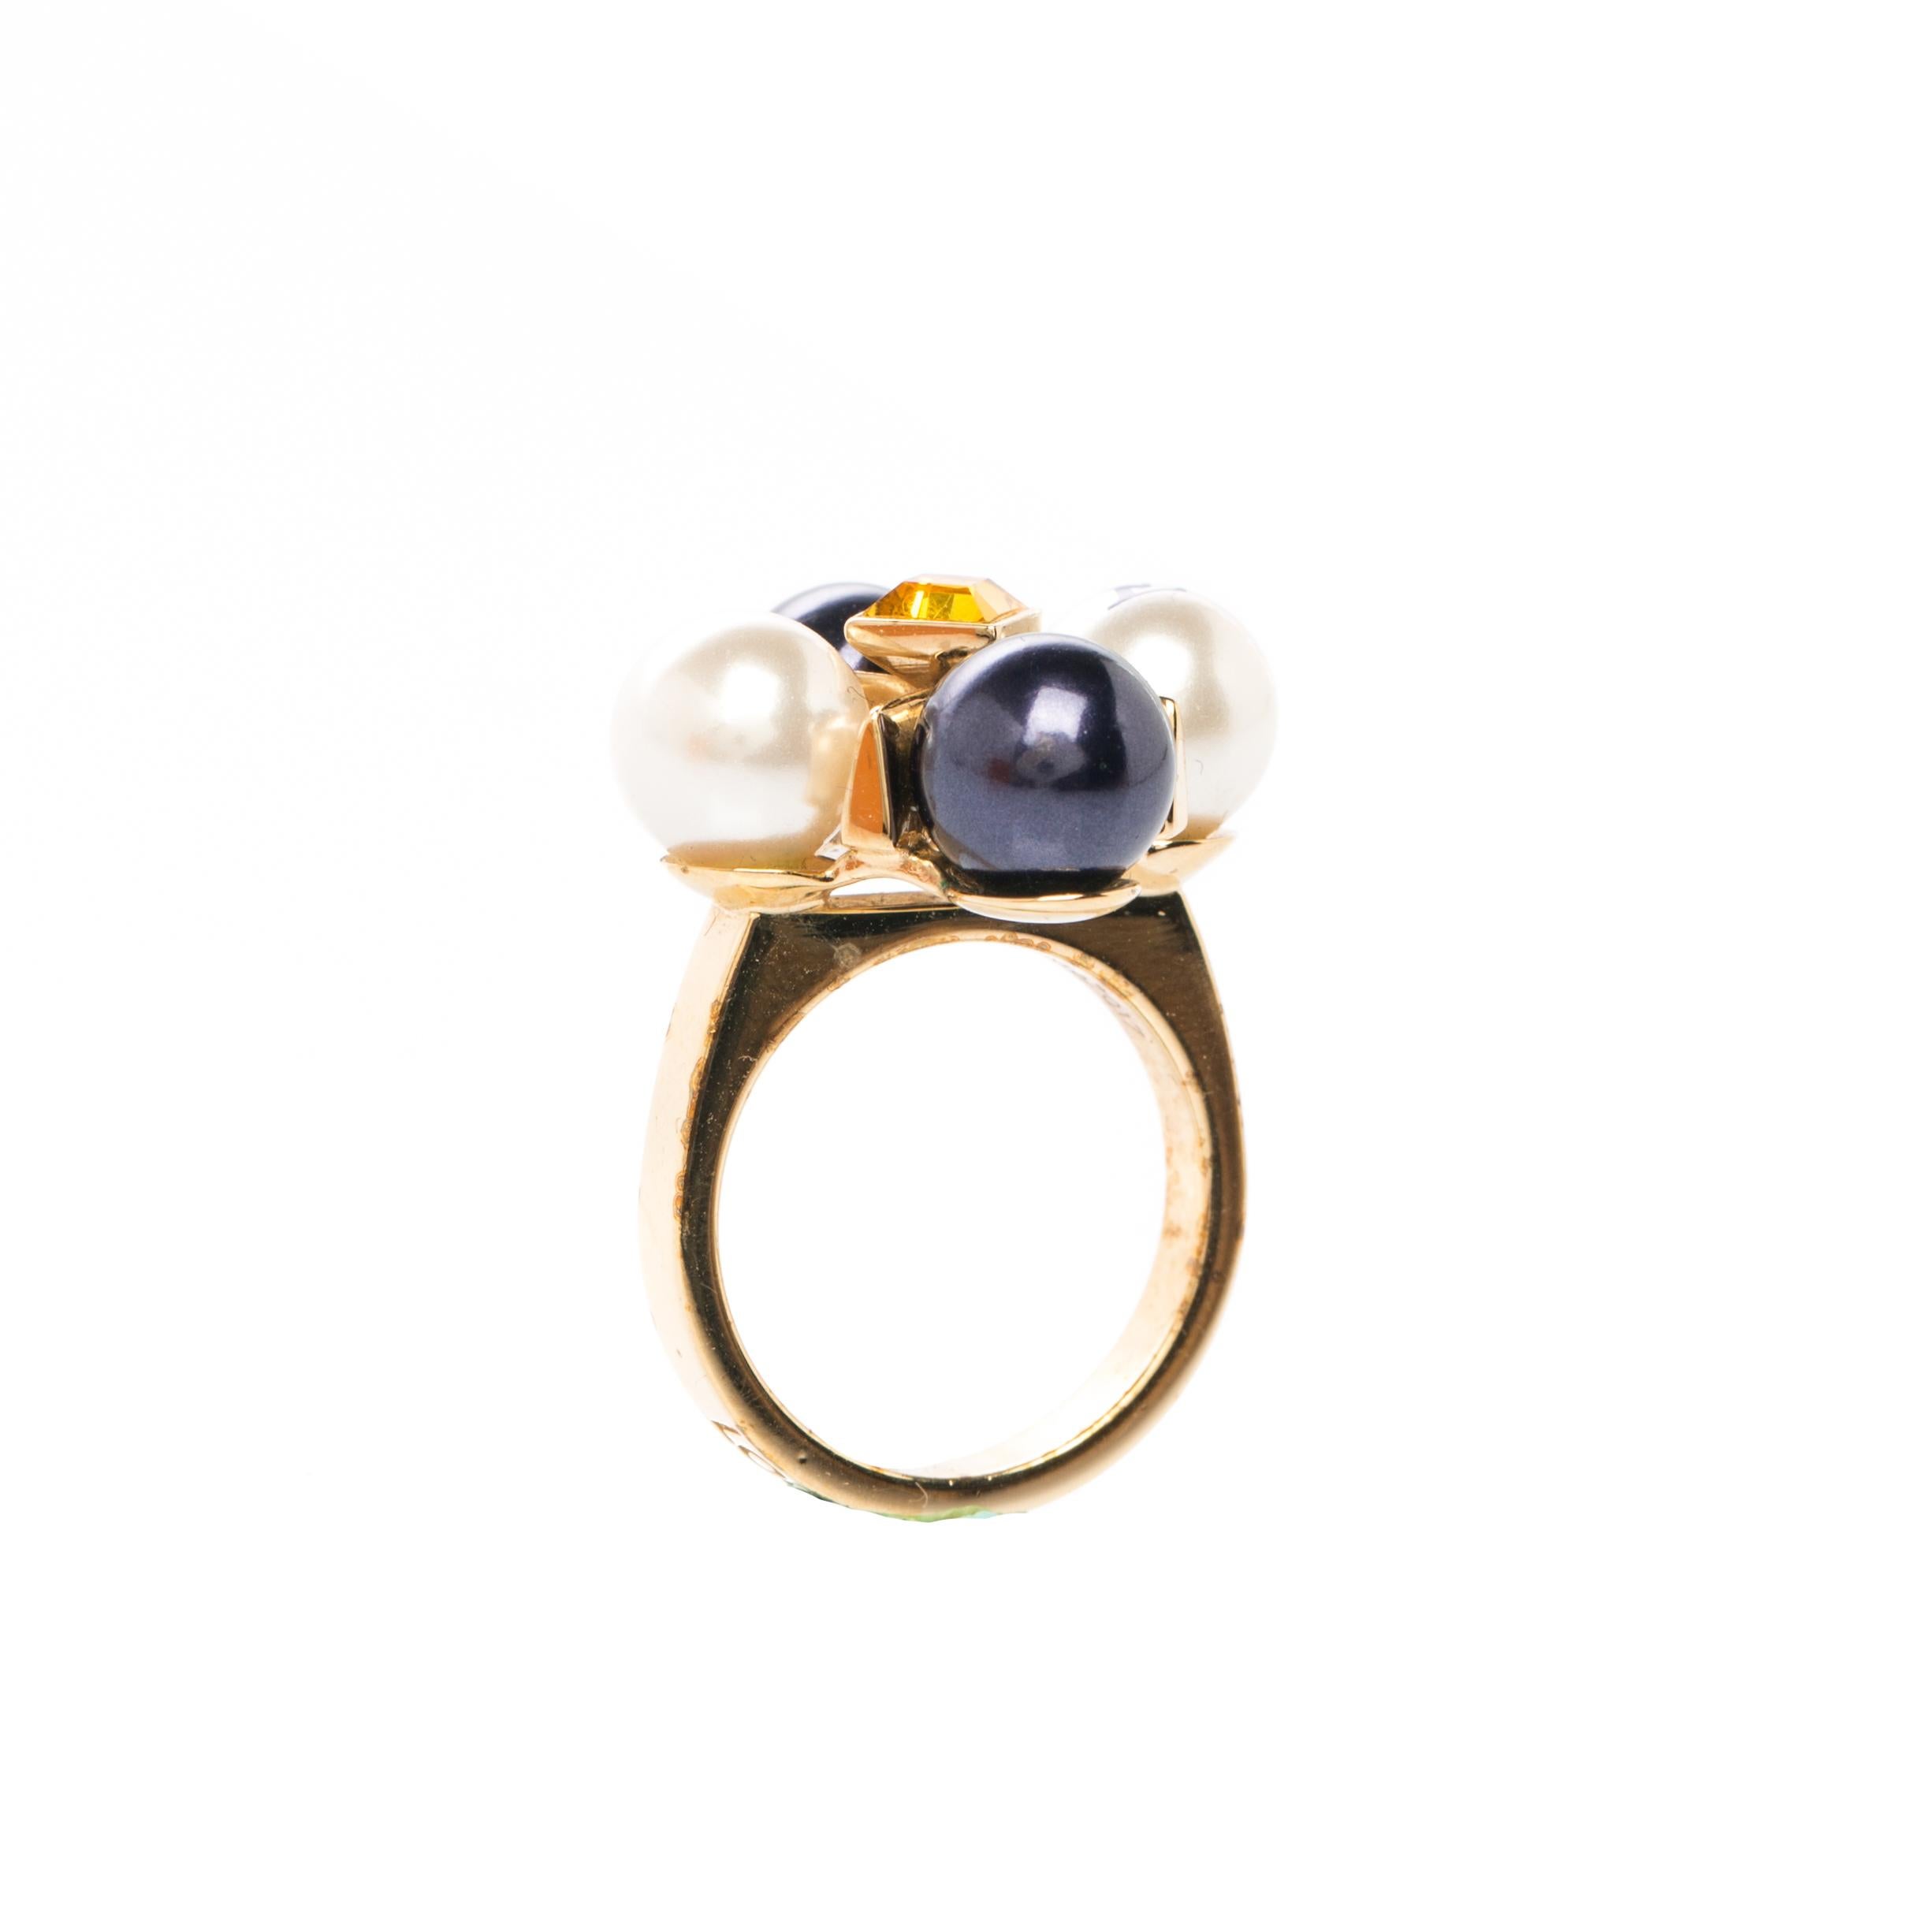 This cocktail ring addresses Louis Vuitton's signature elegance and timelessness. Made from gold-tone metal, the ring is gracefully accented with faux pearls and a crystal. The ring speaks style in a subtle way. LV admirers must have this ethereal